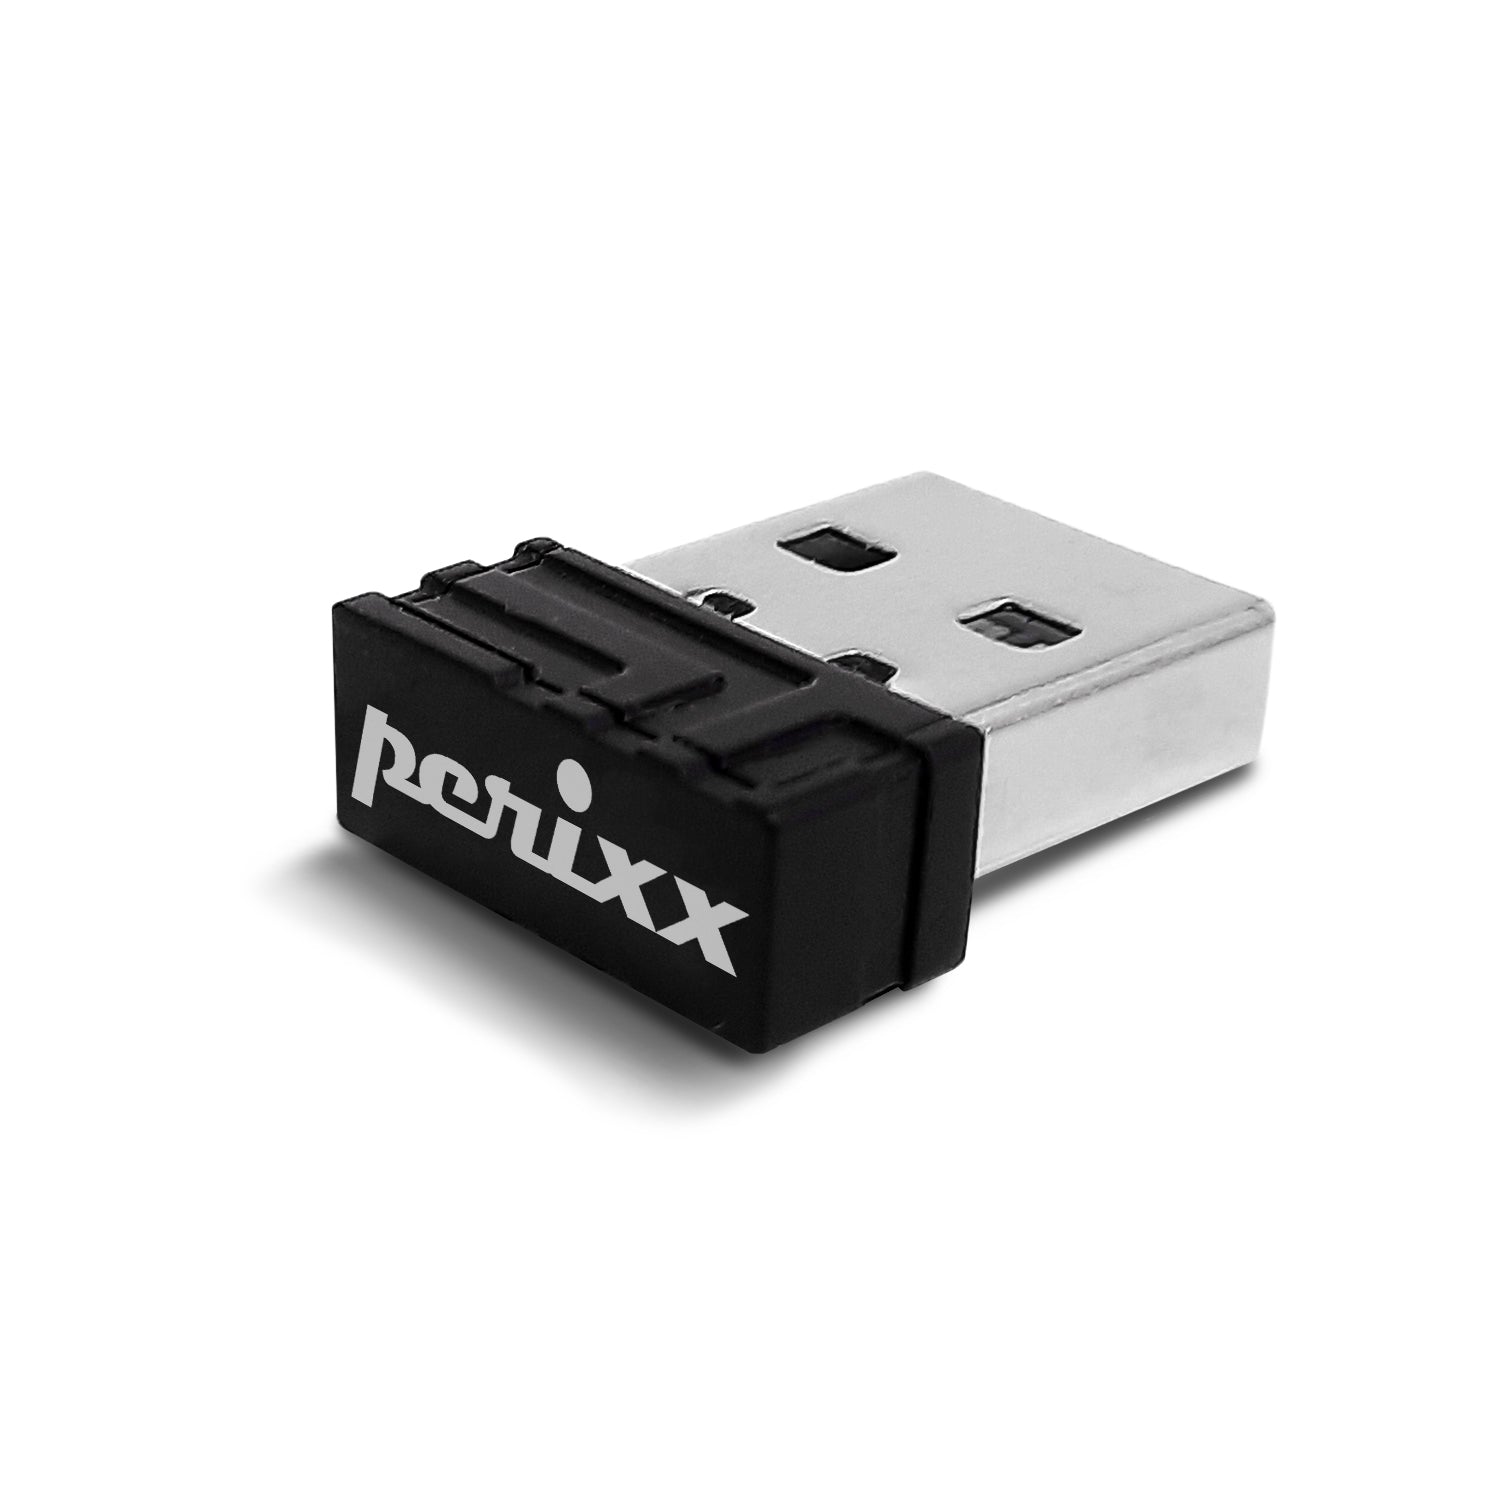 USB dongle receiver for PERIMICE-717 - Perixx Europe